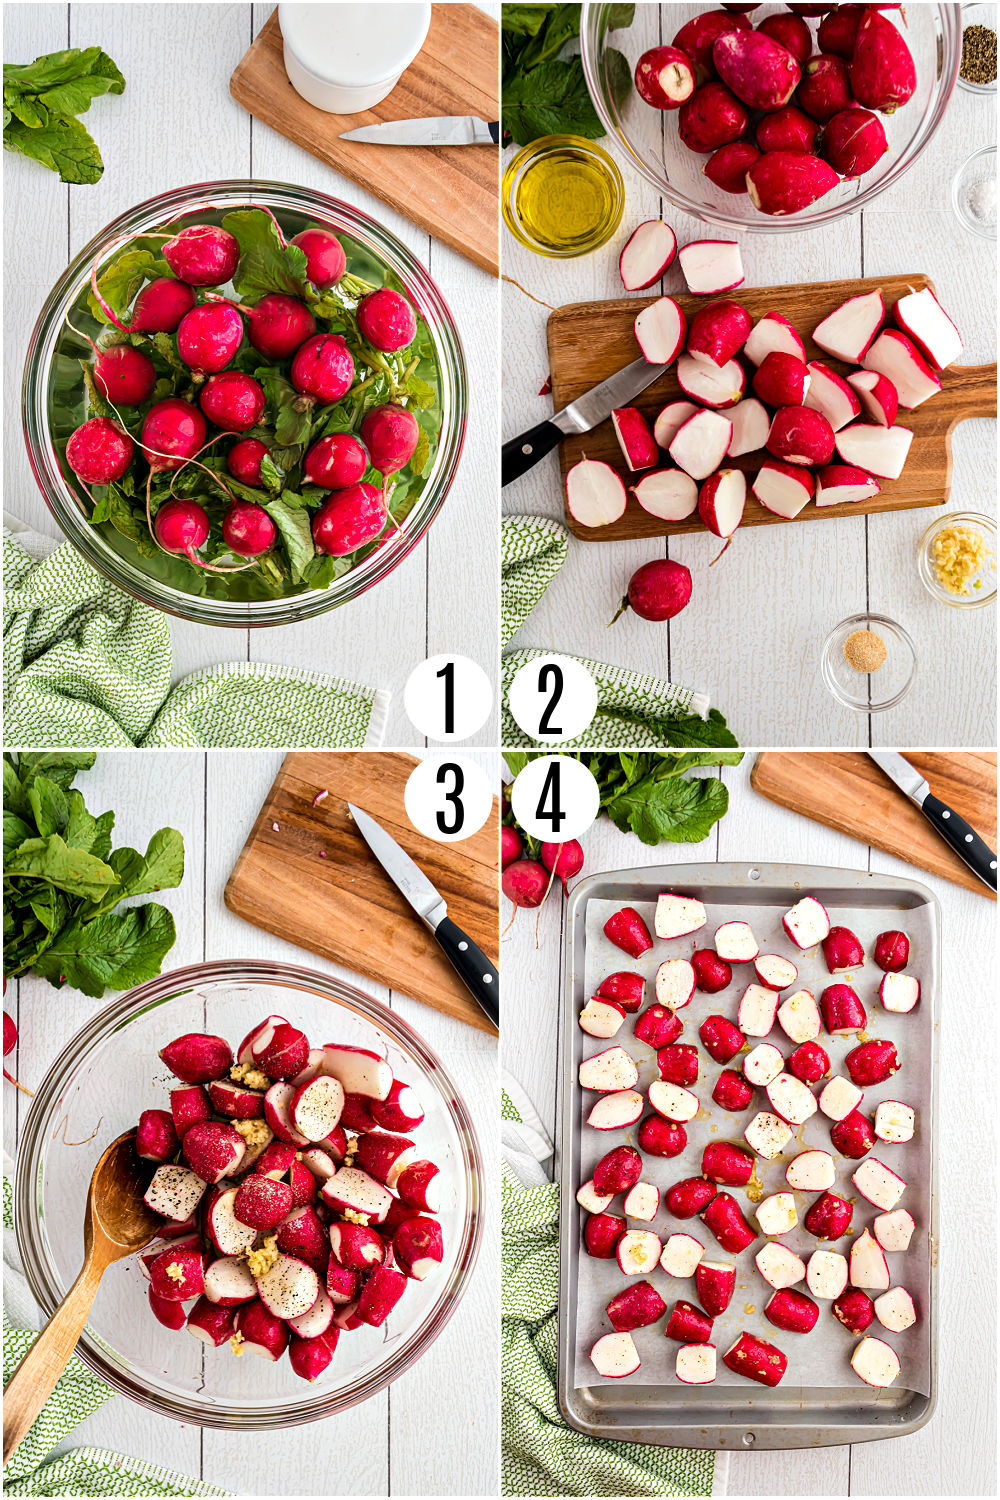 Step by step photos showing how to roast radishes.